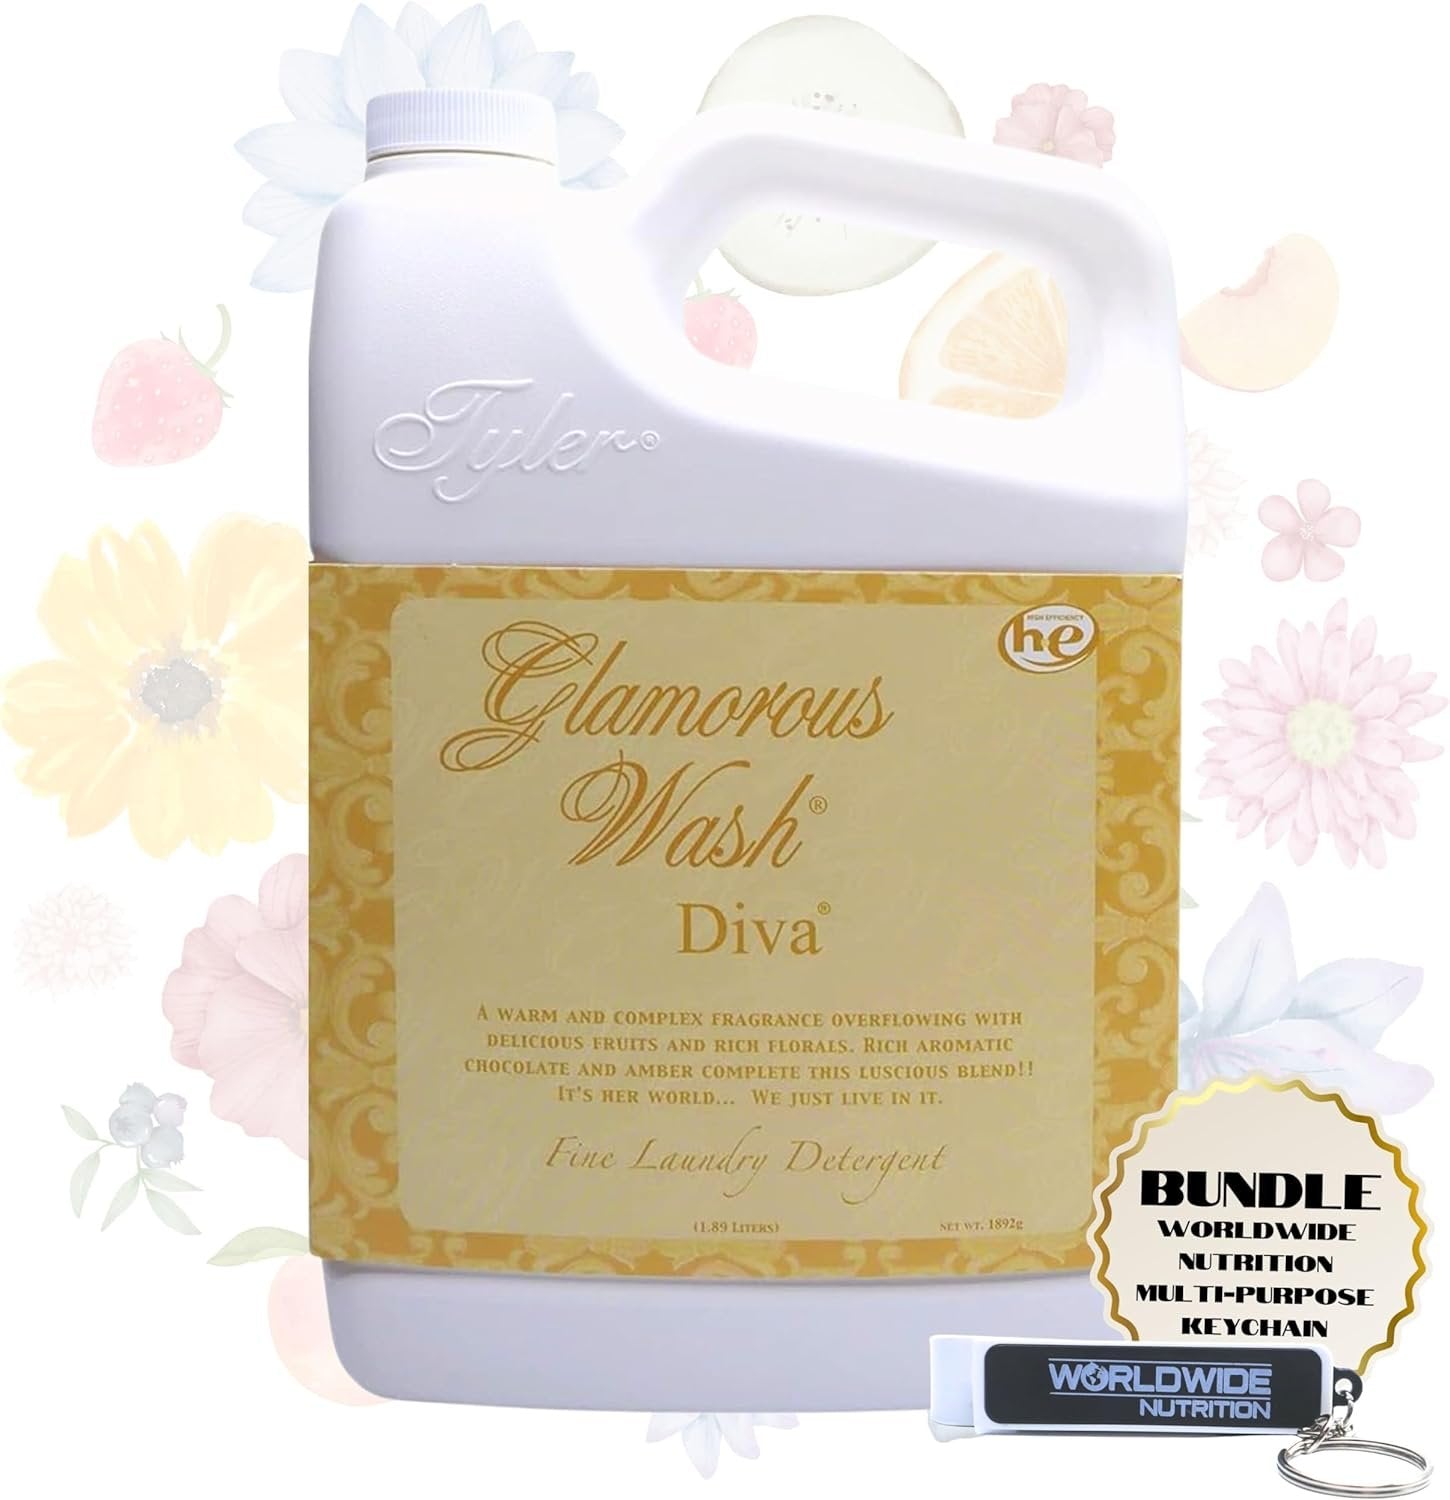 Tyler Candle Company Glamorous Wash Diva Fine Laundry Liquid Detergent - Hand and Machine Washable - 1.89 L (64oz) - Pack of 1 with Multi-Purpose Key Chain